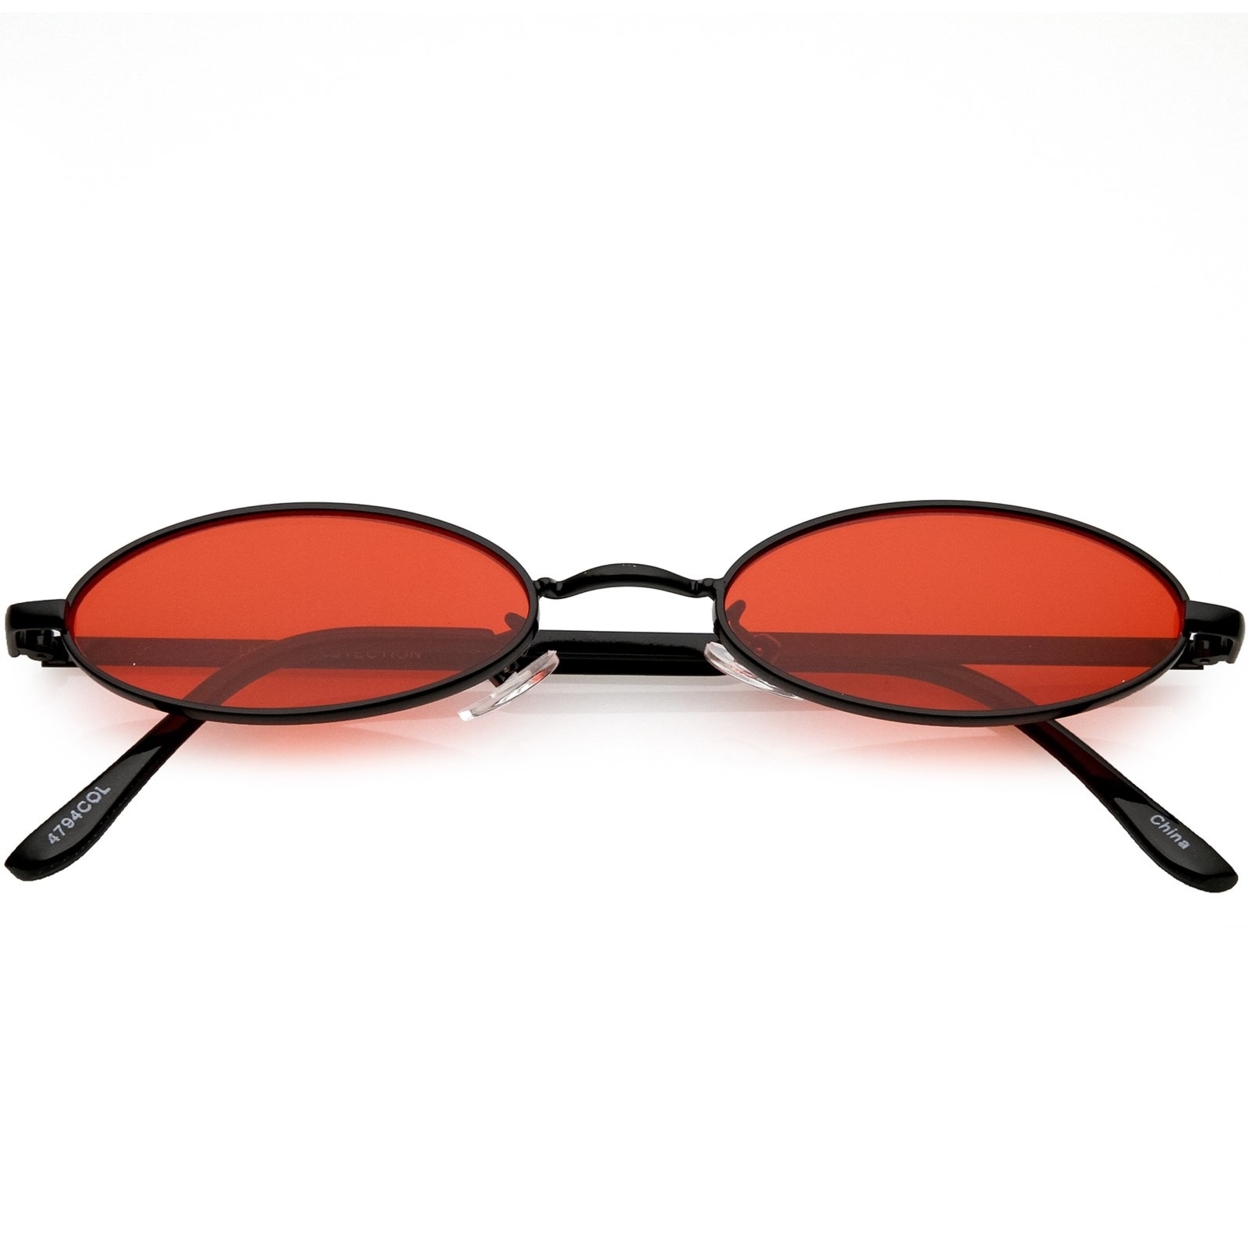 Extreme Small Oval Sunglasses Color Tinted Flat Lens 51mm - Black / Red